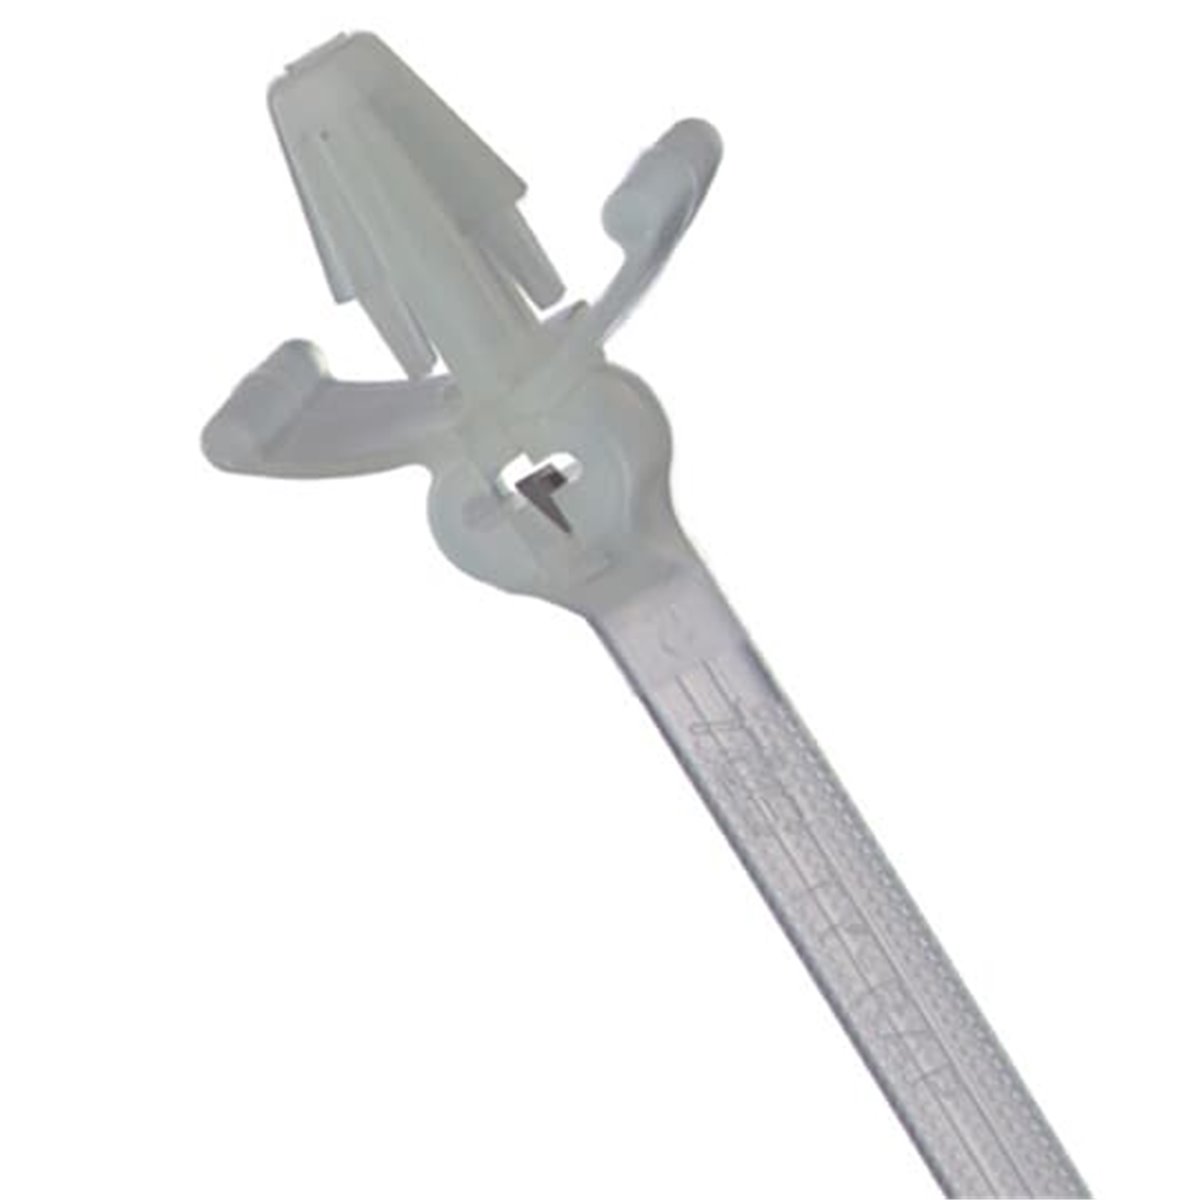 TY538M TY-RAP-CLINCH CABLE TIE 50LB 8IN NAT NYL PUSH MNT